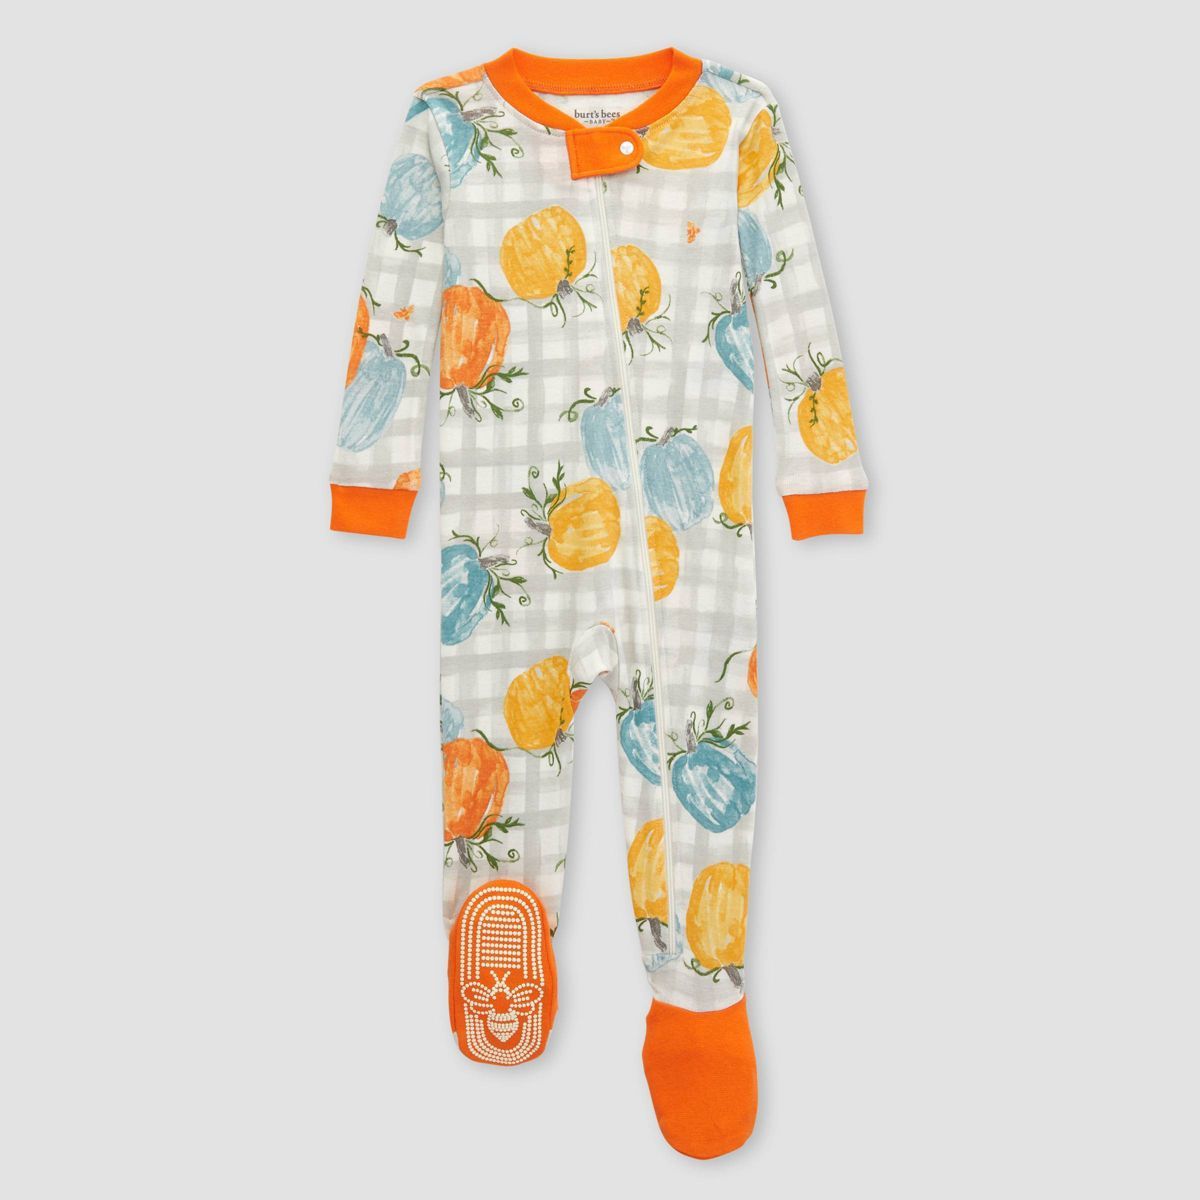 Burt's Bees Baby® Baby Organic Cotton Tight Fit Footed Pajama | Target